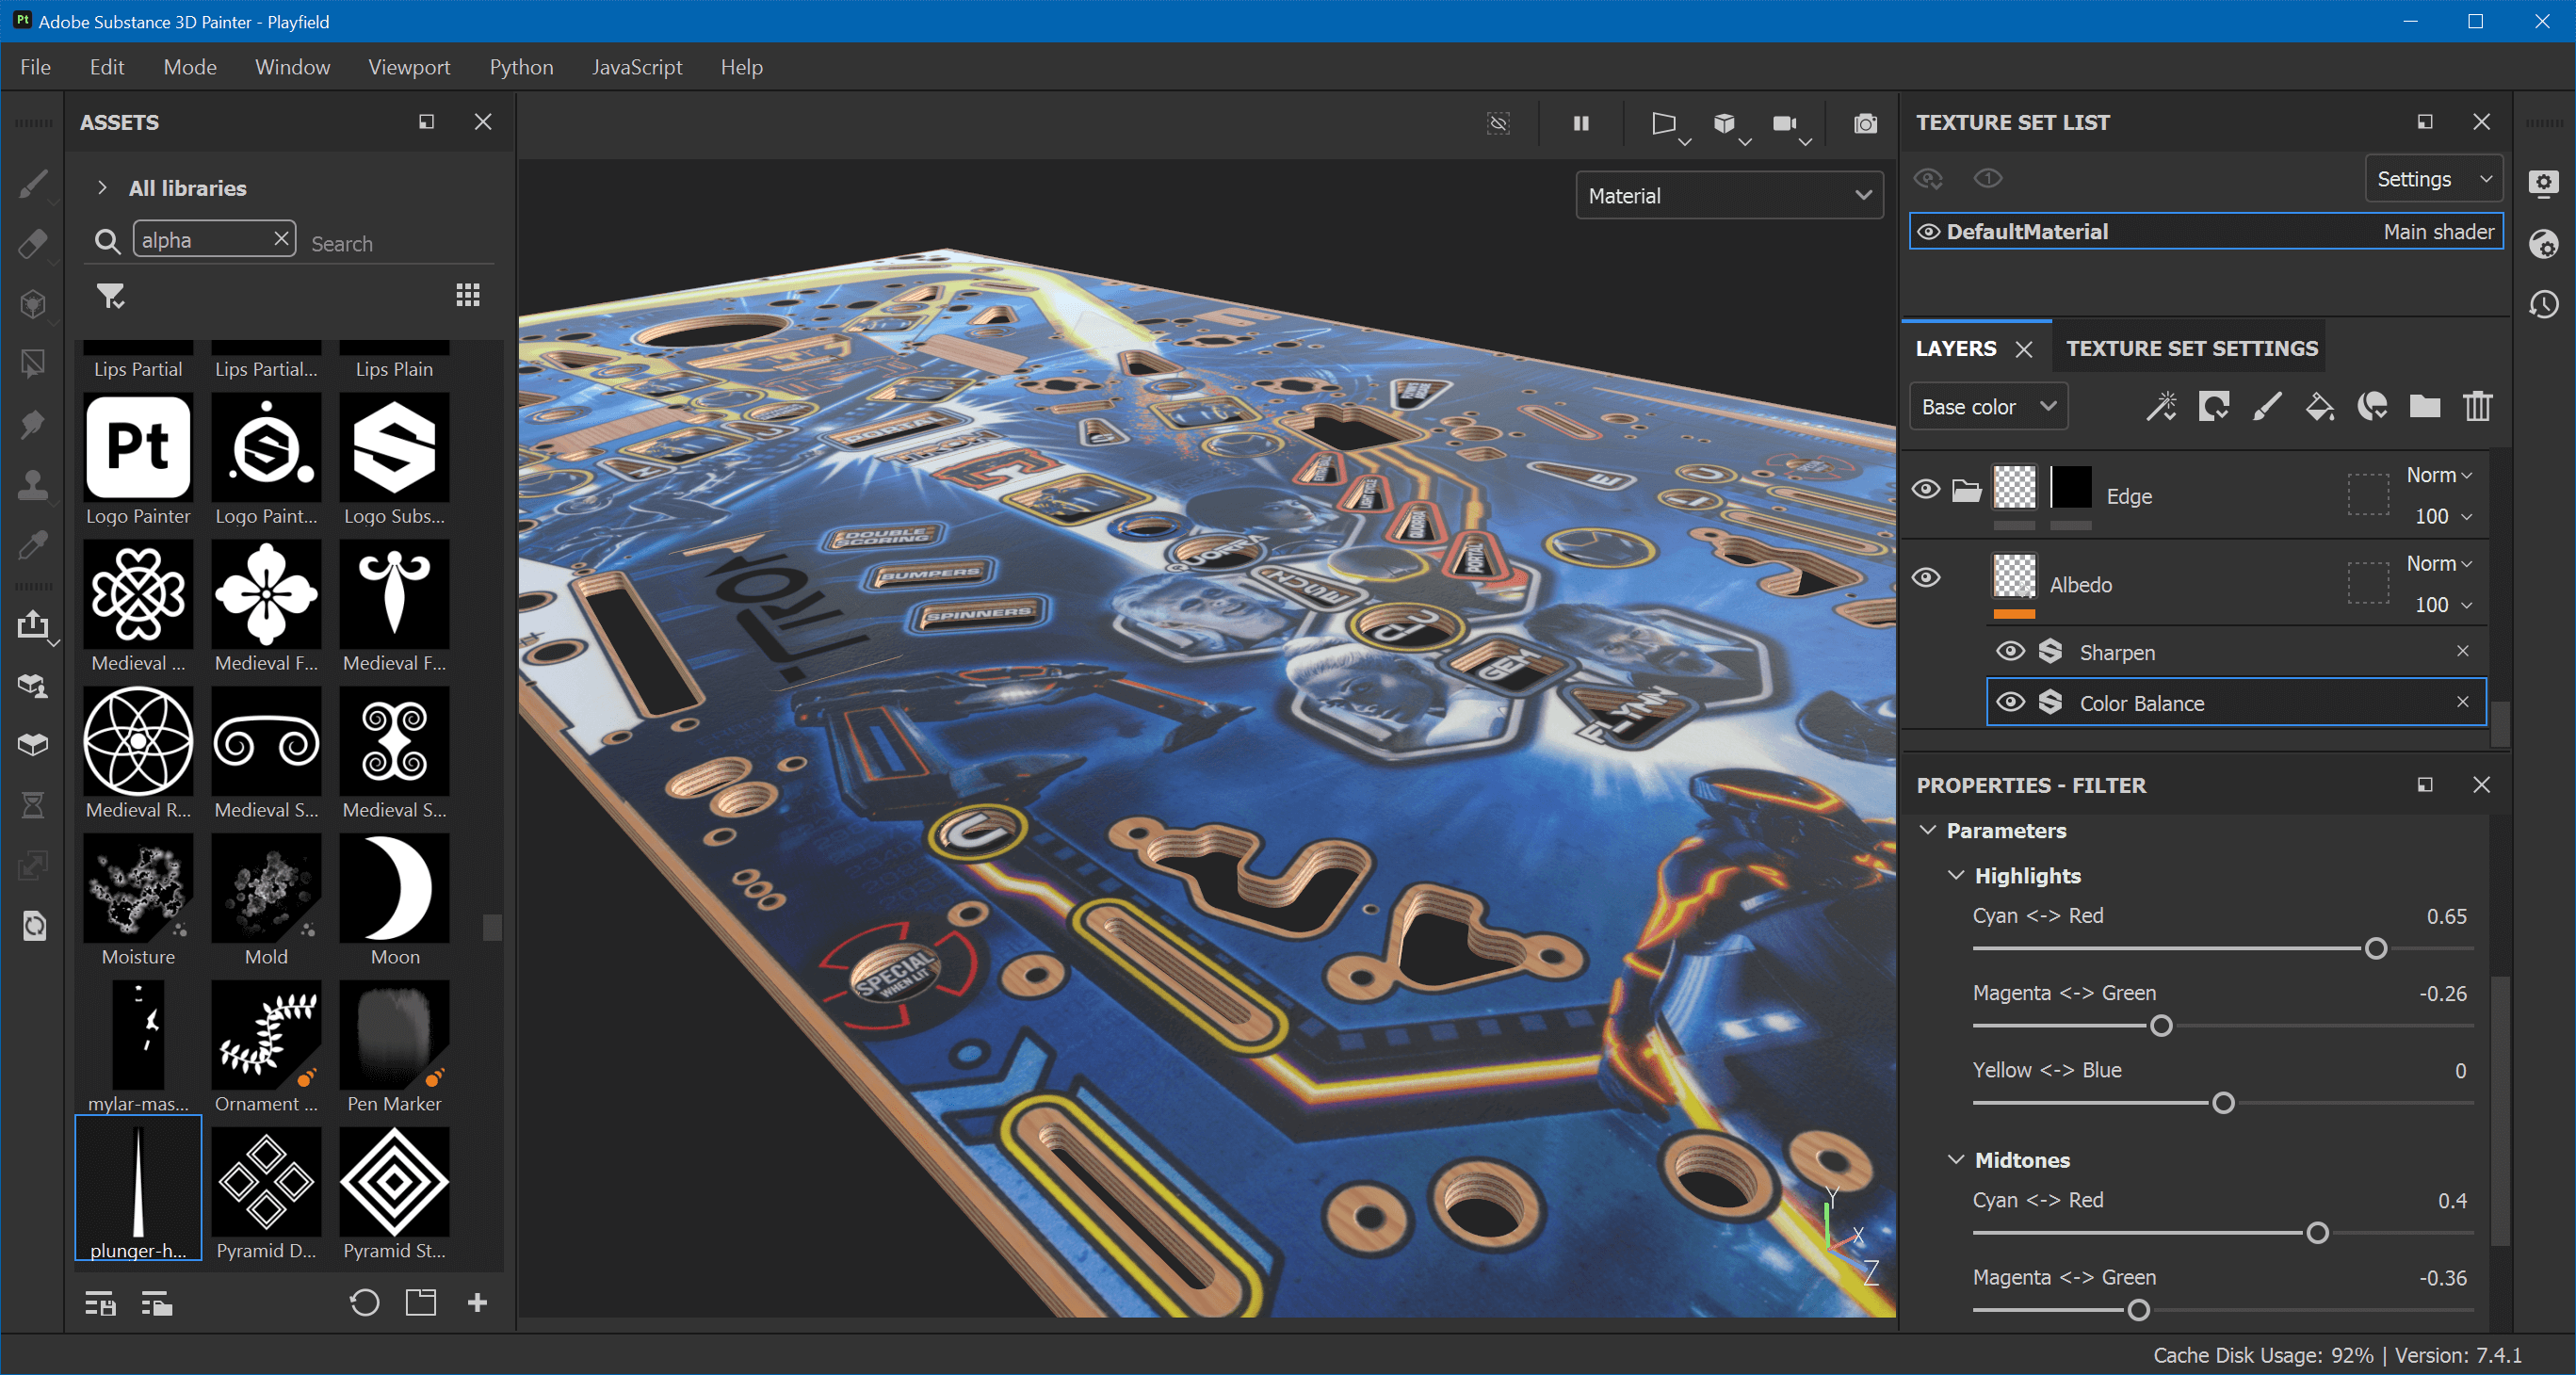 Edge Mapping